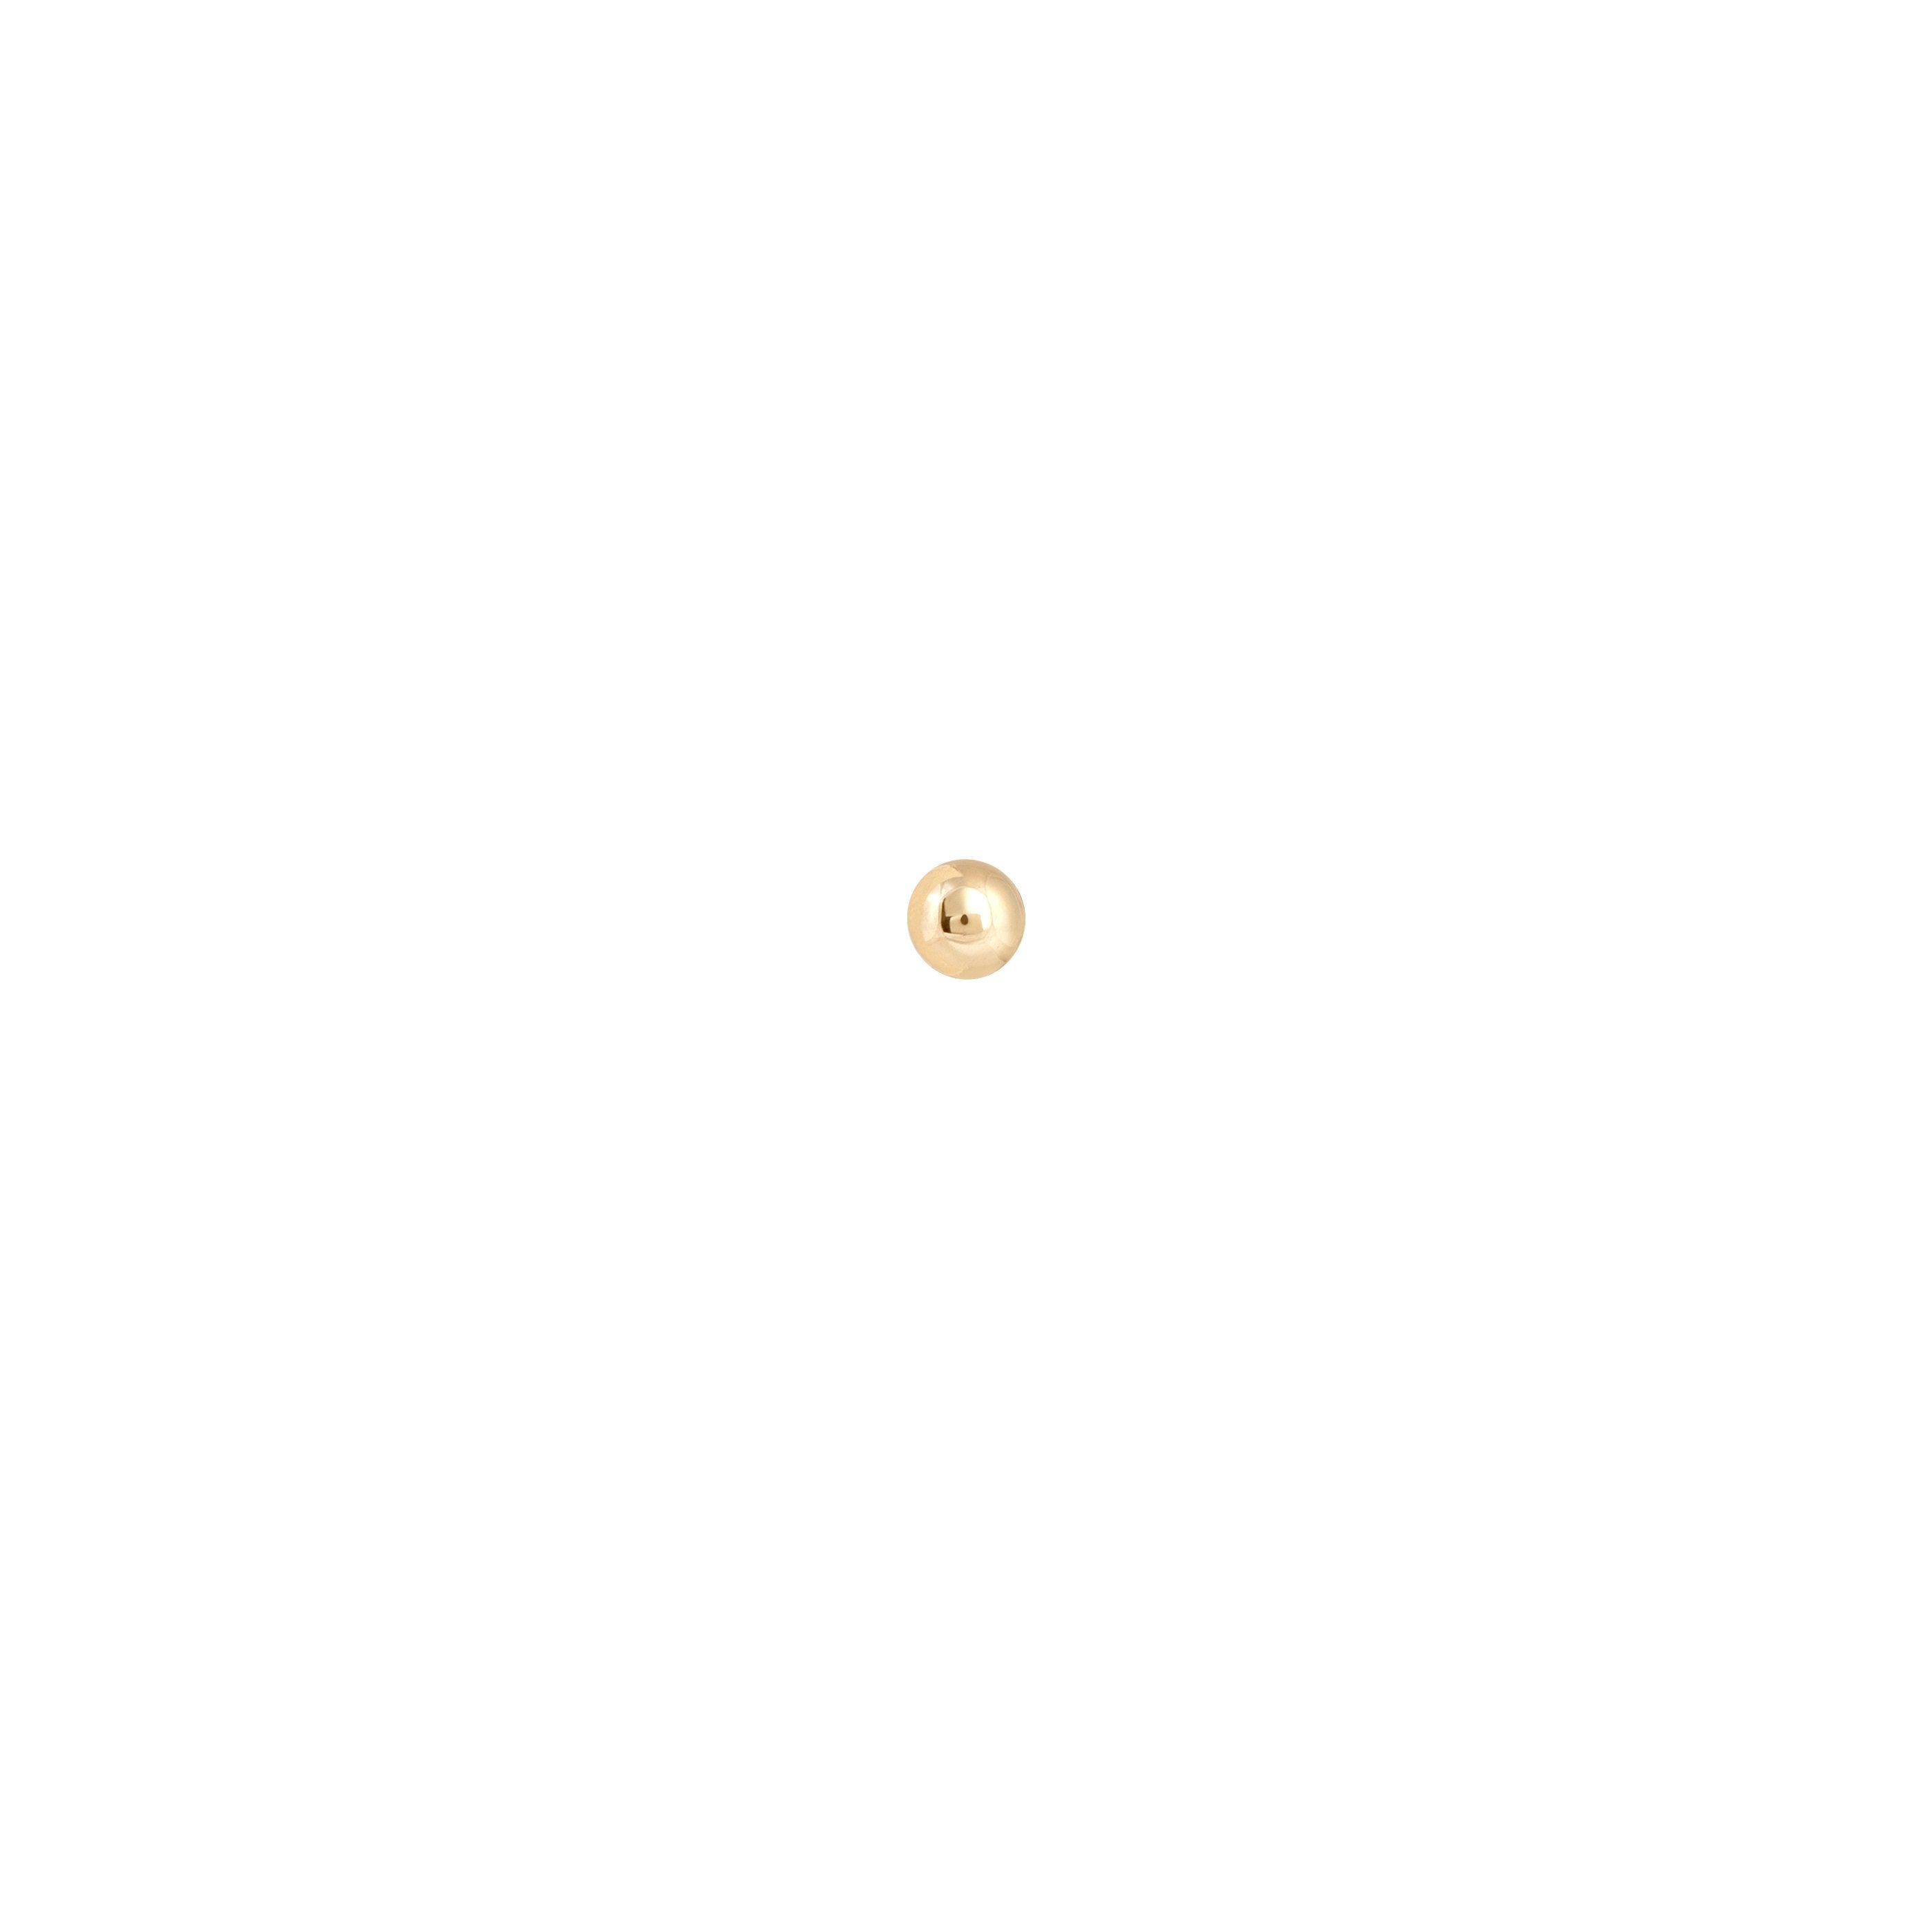 Solid Gold Small Ball Piercing Stud